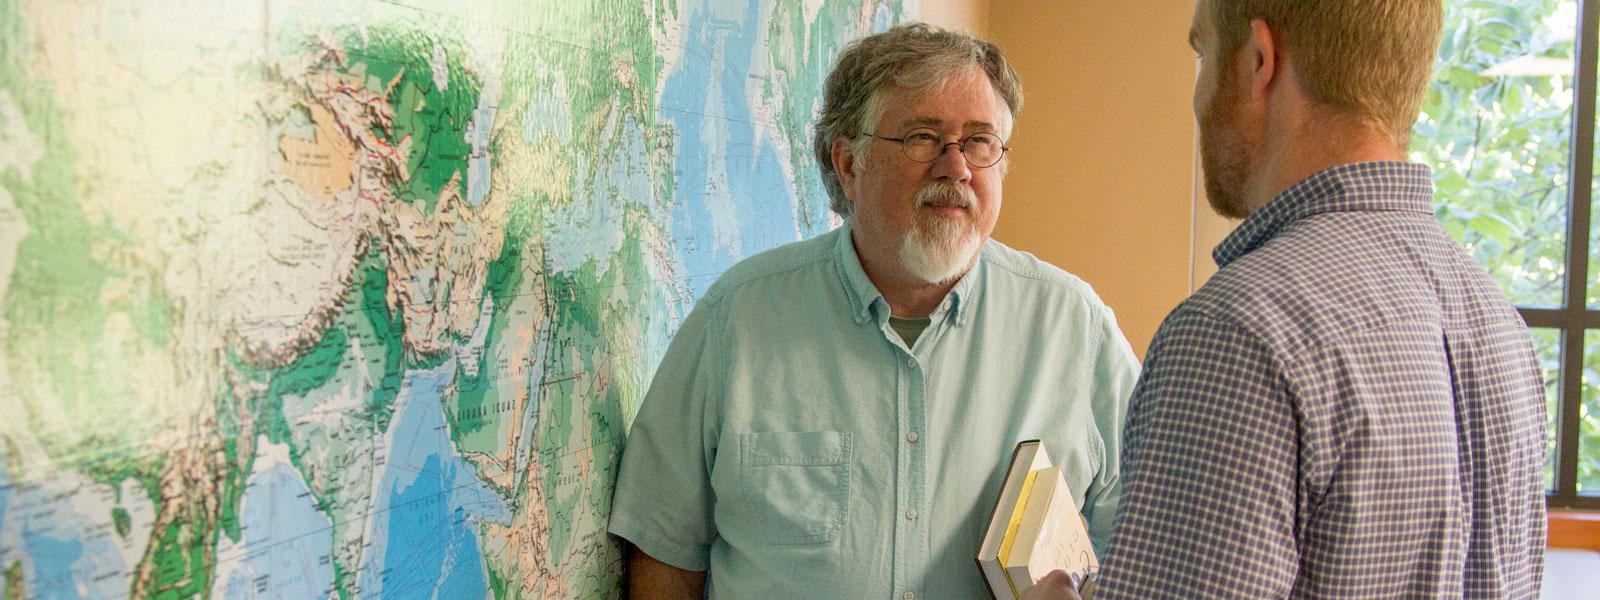 ministry professor holds books and talks to student while standing in front of world map on wall